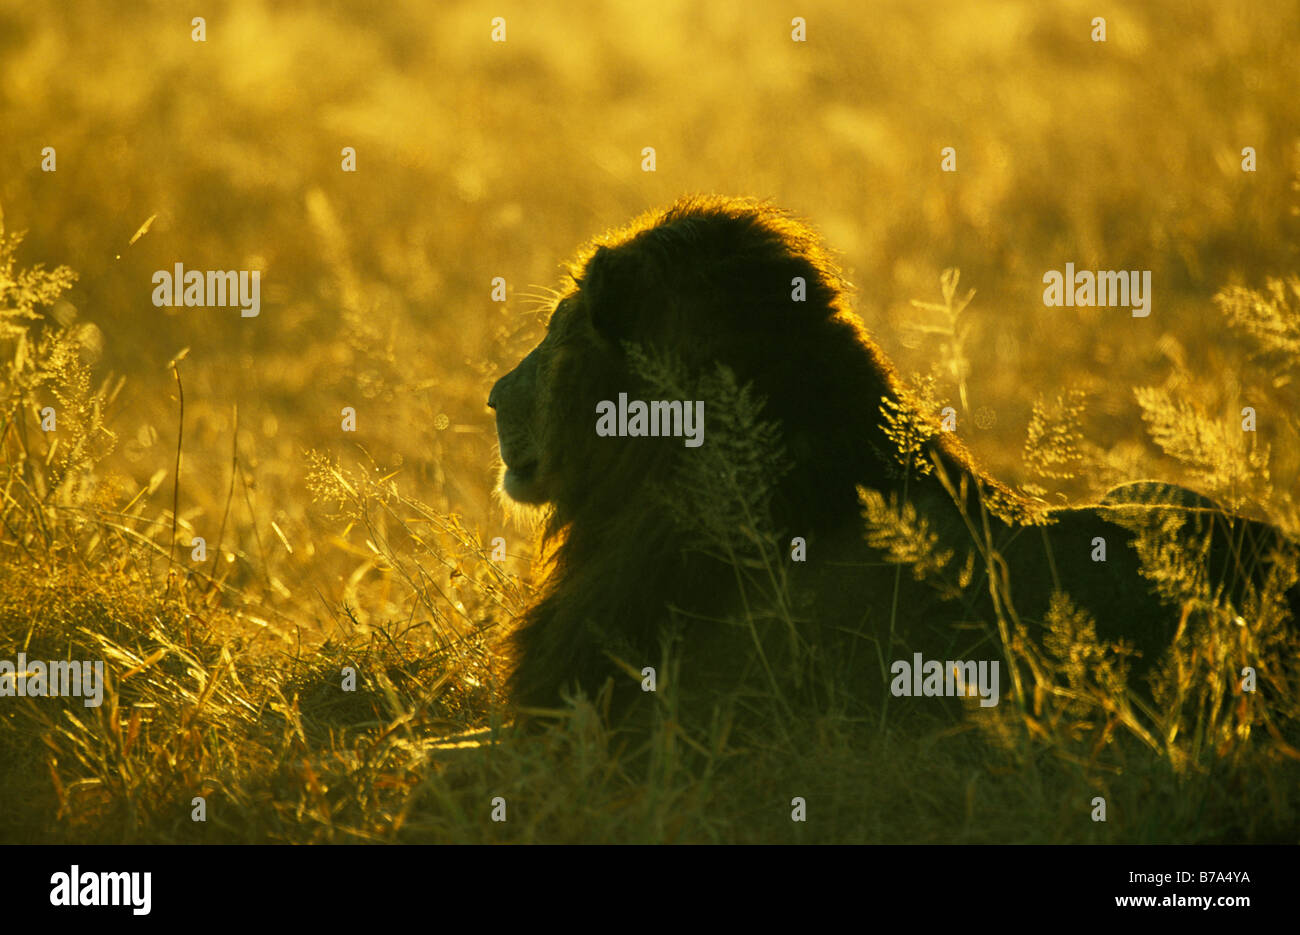 Sunrise silhouette of a male lion resting in flowering grasses Stock Photo